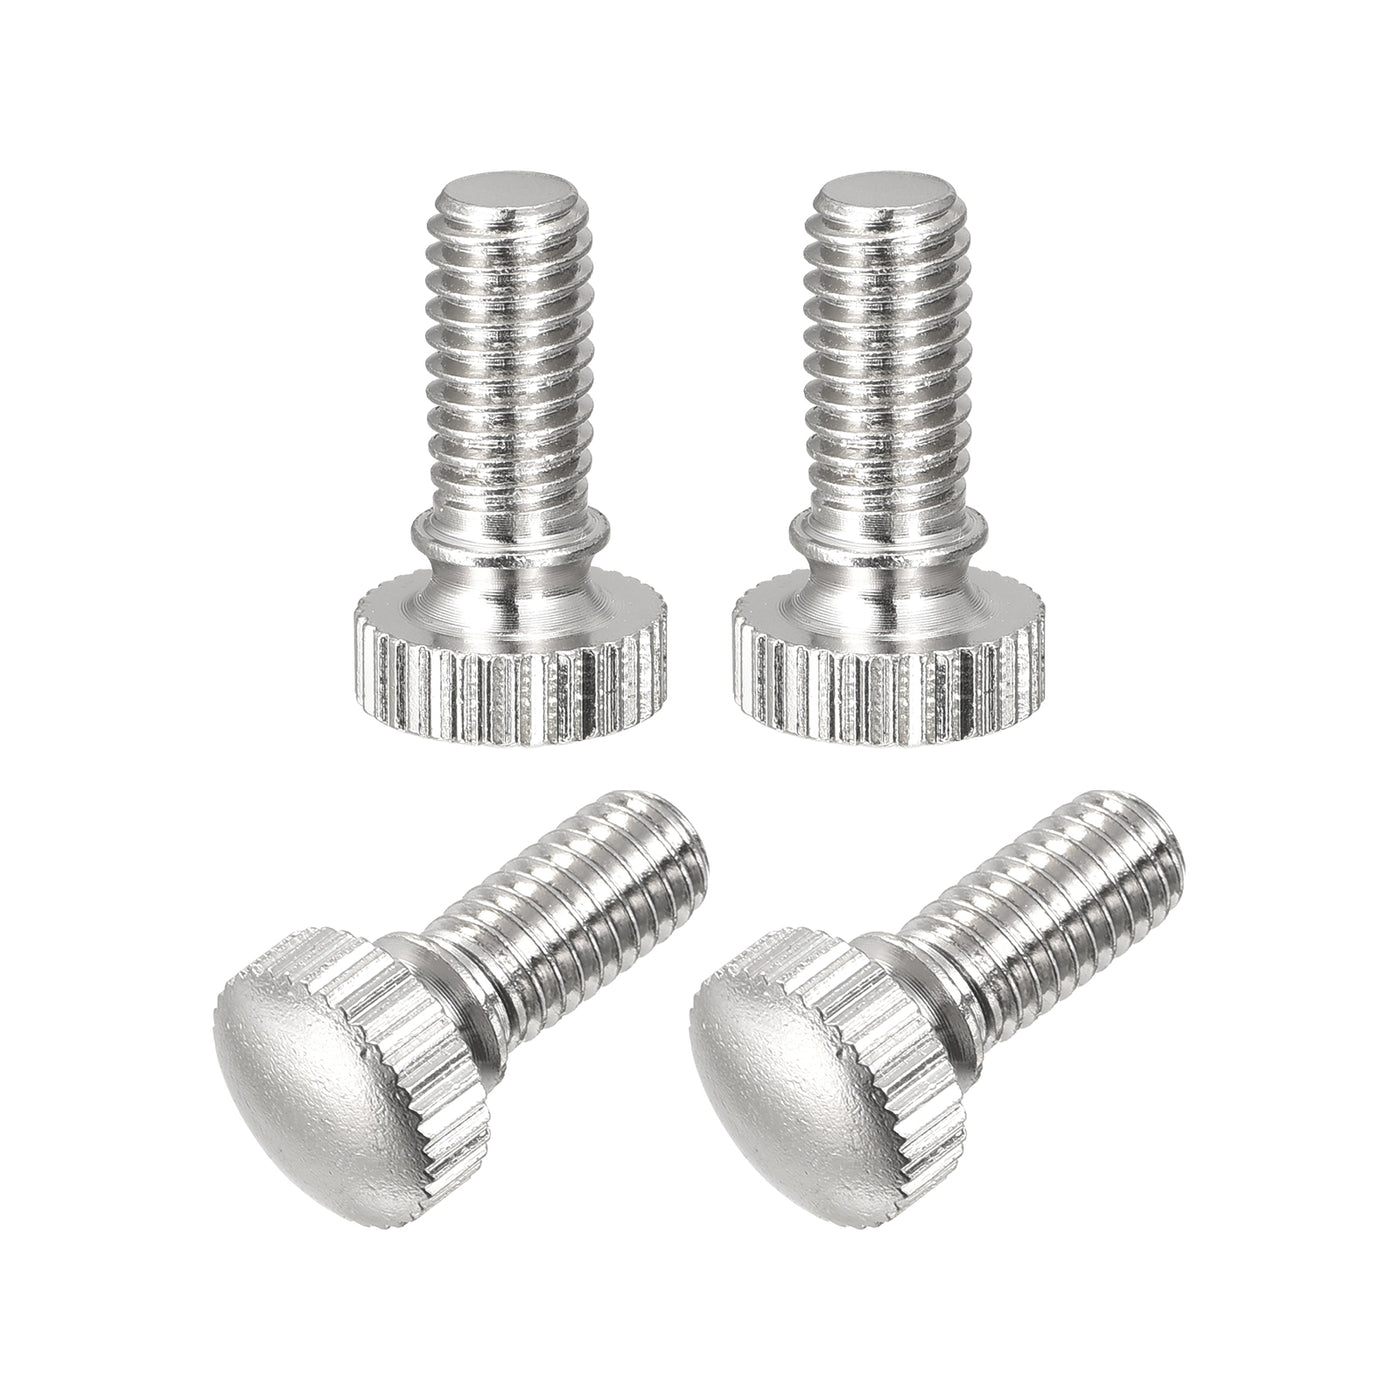 uxcell Uxcell Knurled Thumb Screws, M6x12mm Brass Shoulder Bolts Grip Knobs Fasteners, Nickel Plated 4Pcs